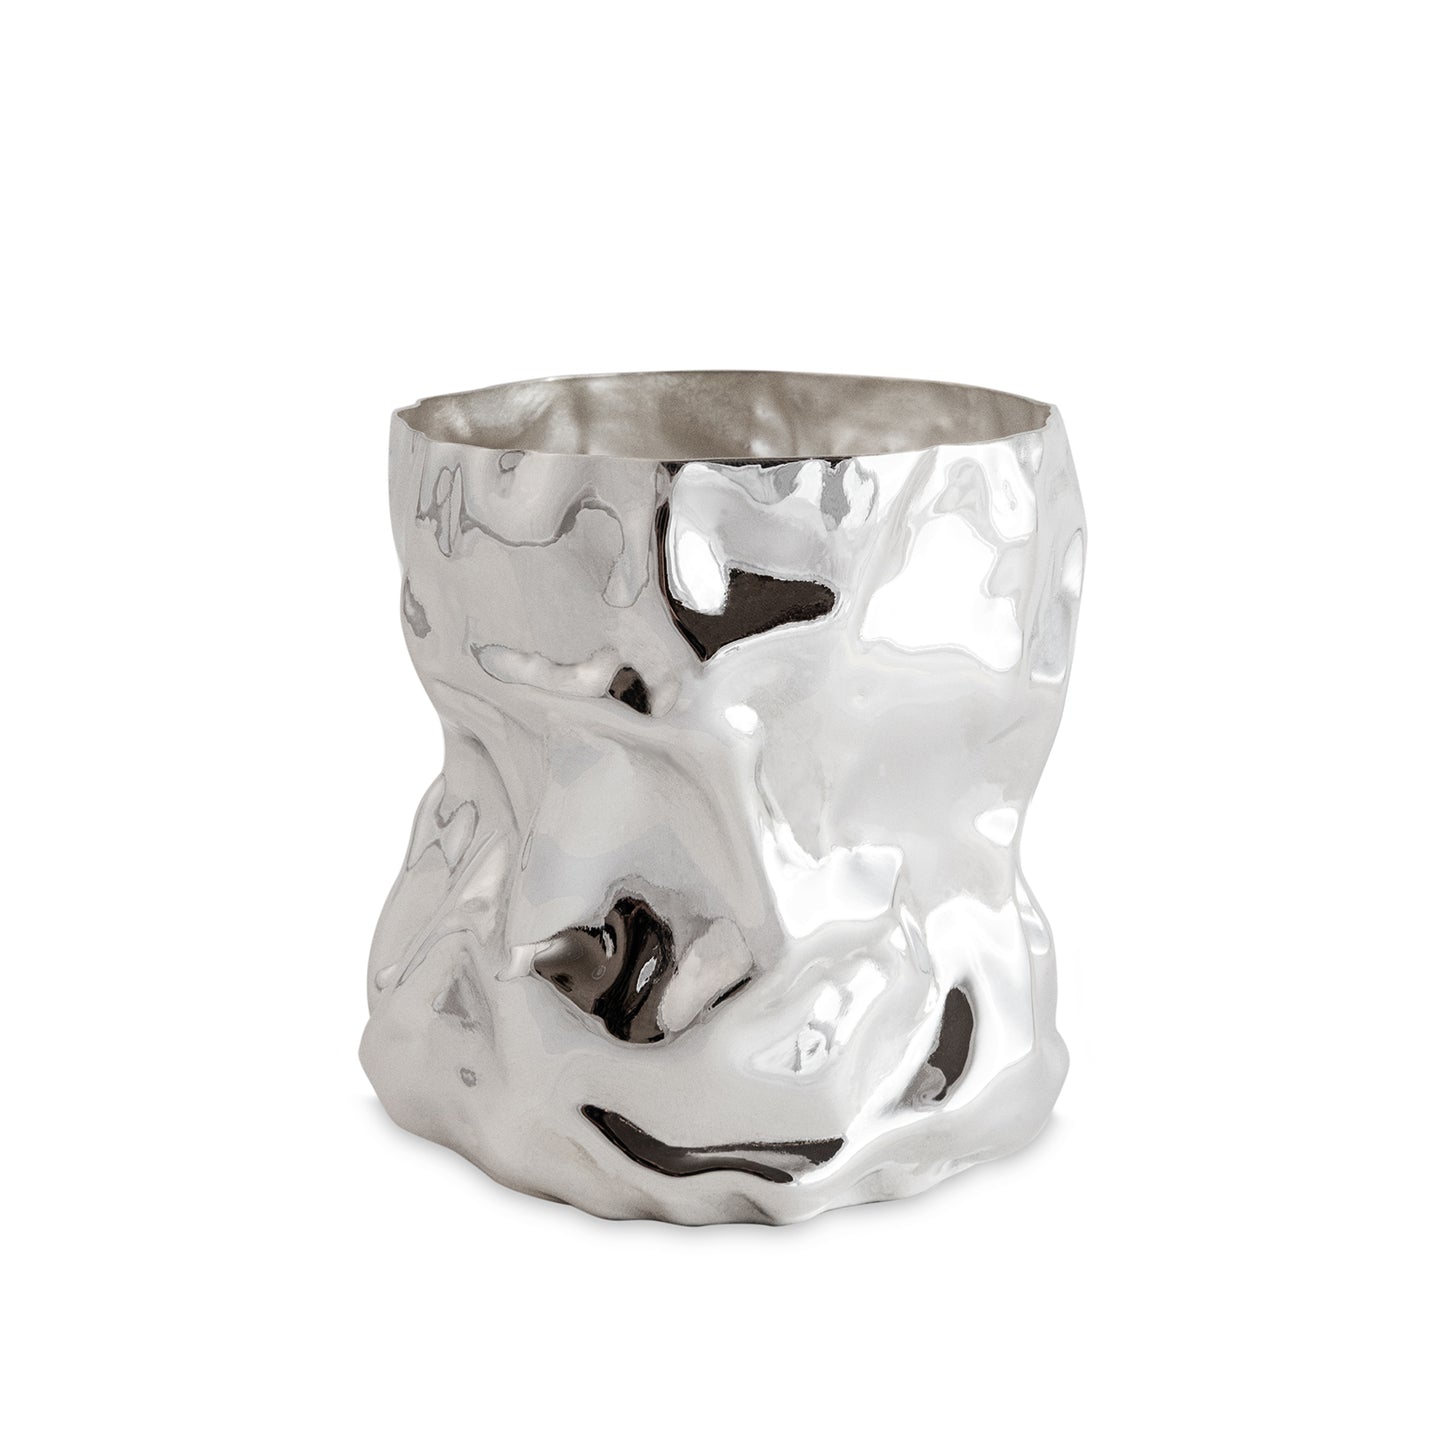 CARTHAGO CUP - STERLING SILVER